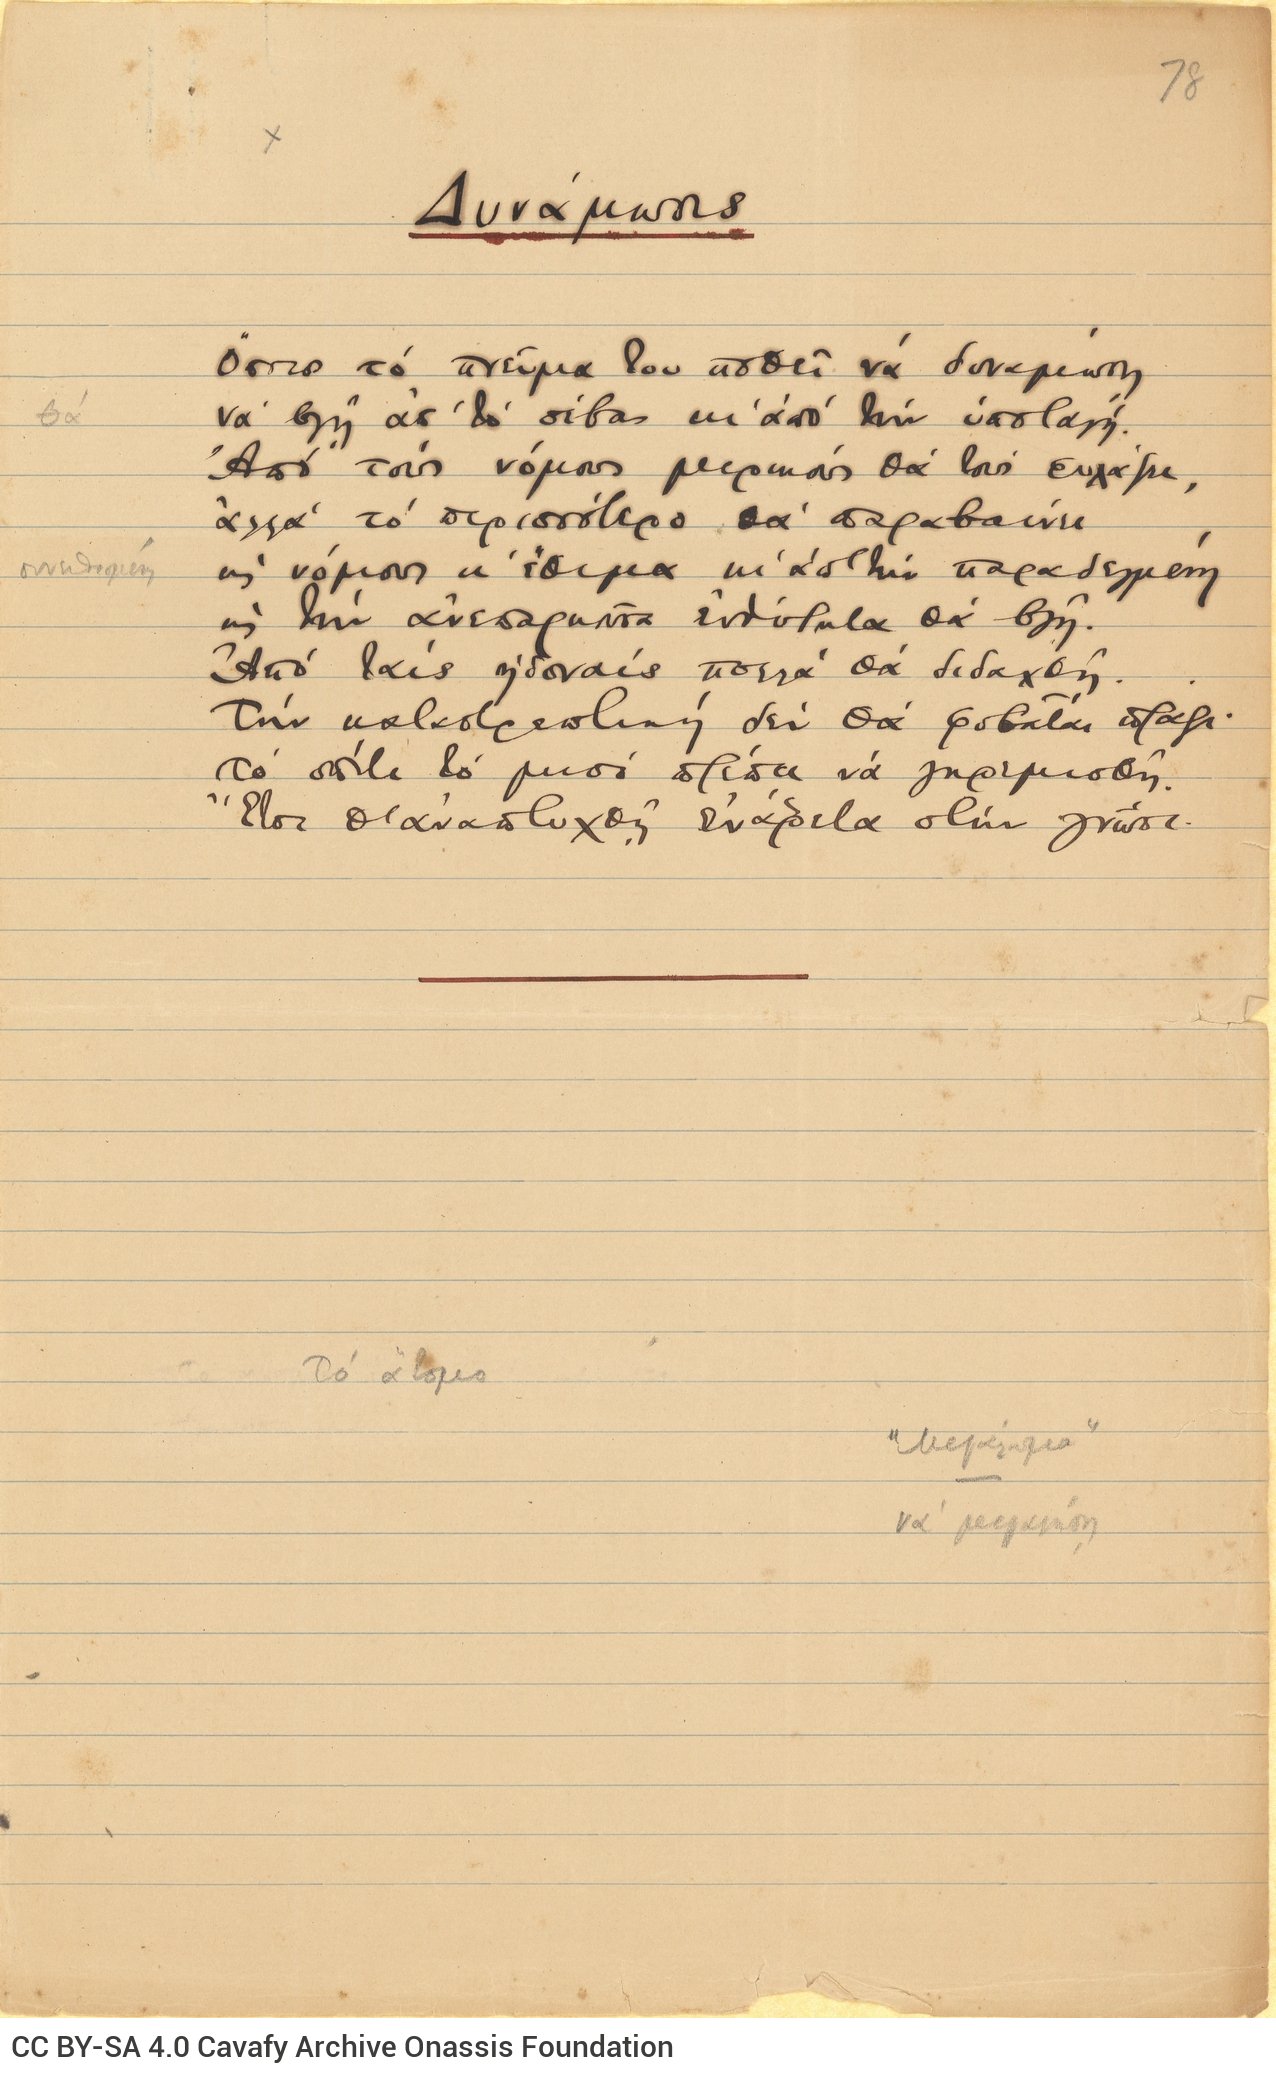 Manuscript of a poem and attached handwritten note. On a ruled sheet, the poem "Strengthening" and notes in the margin. Th